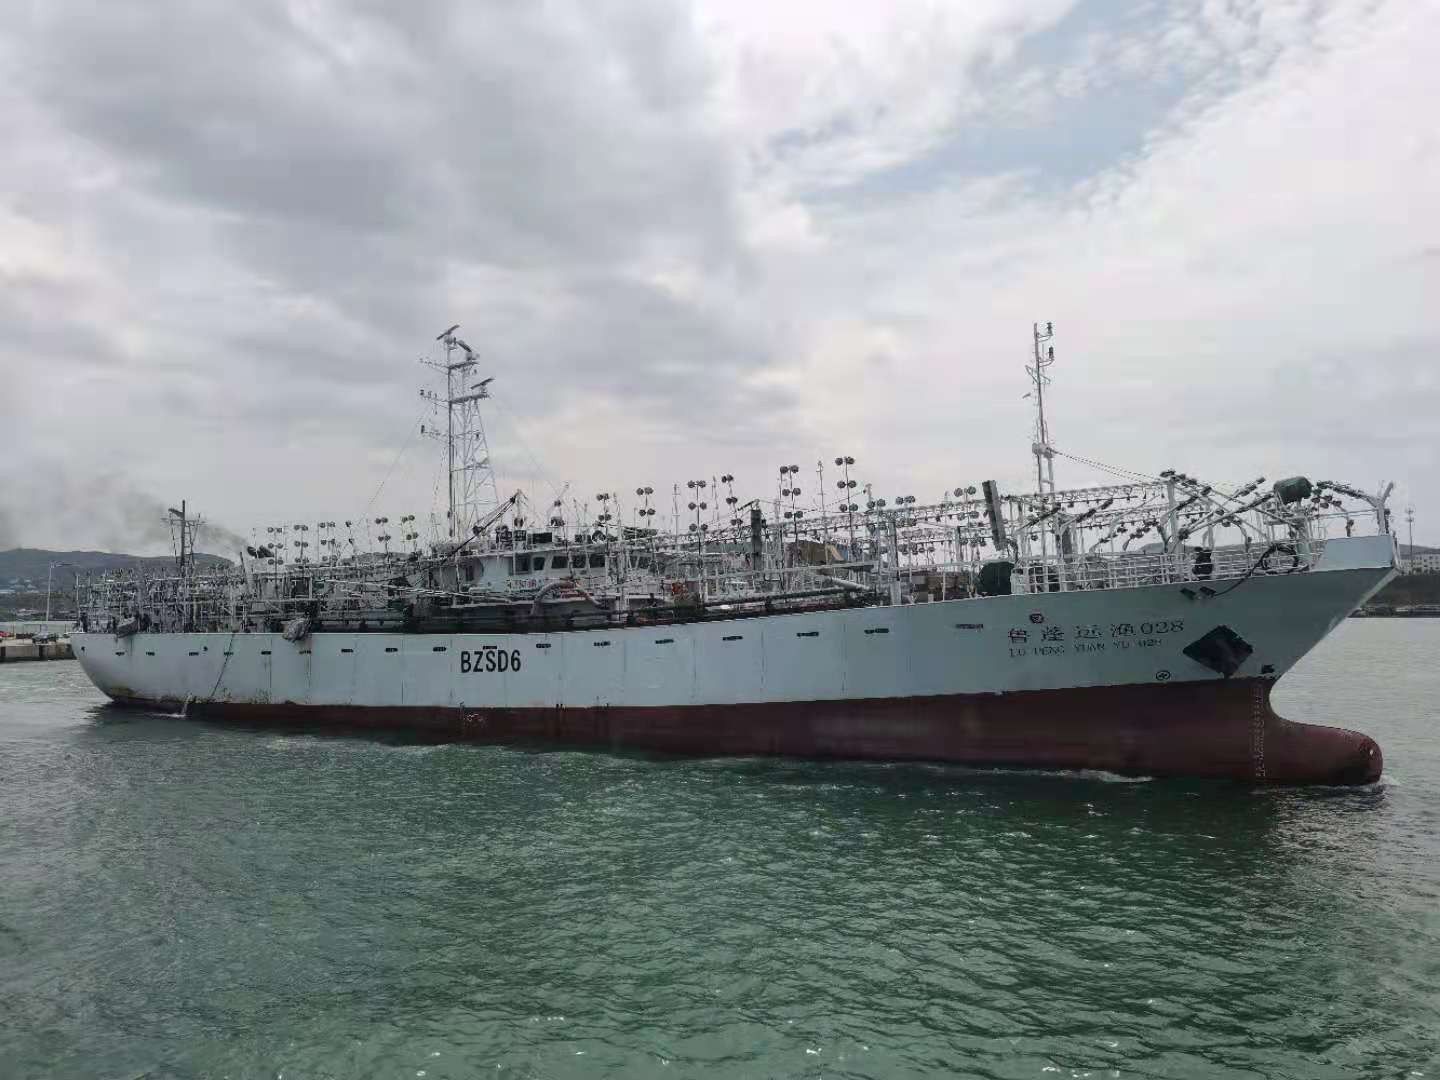 No survivors in Chinese fishing vessel capsizing â�� initial probe